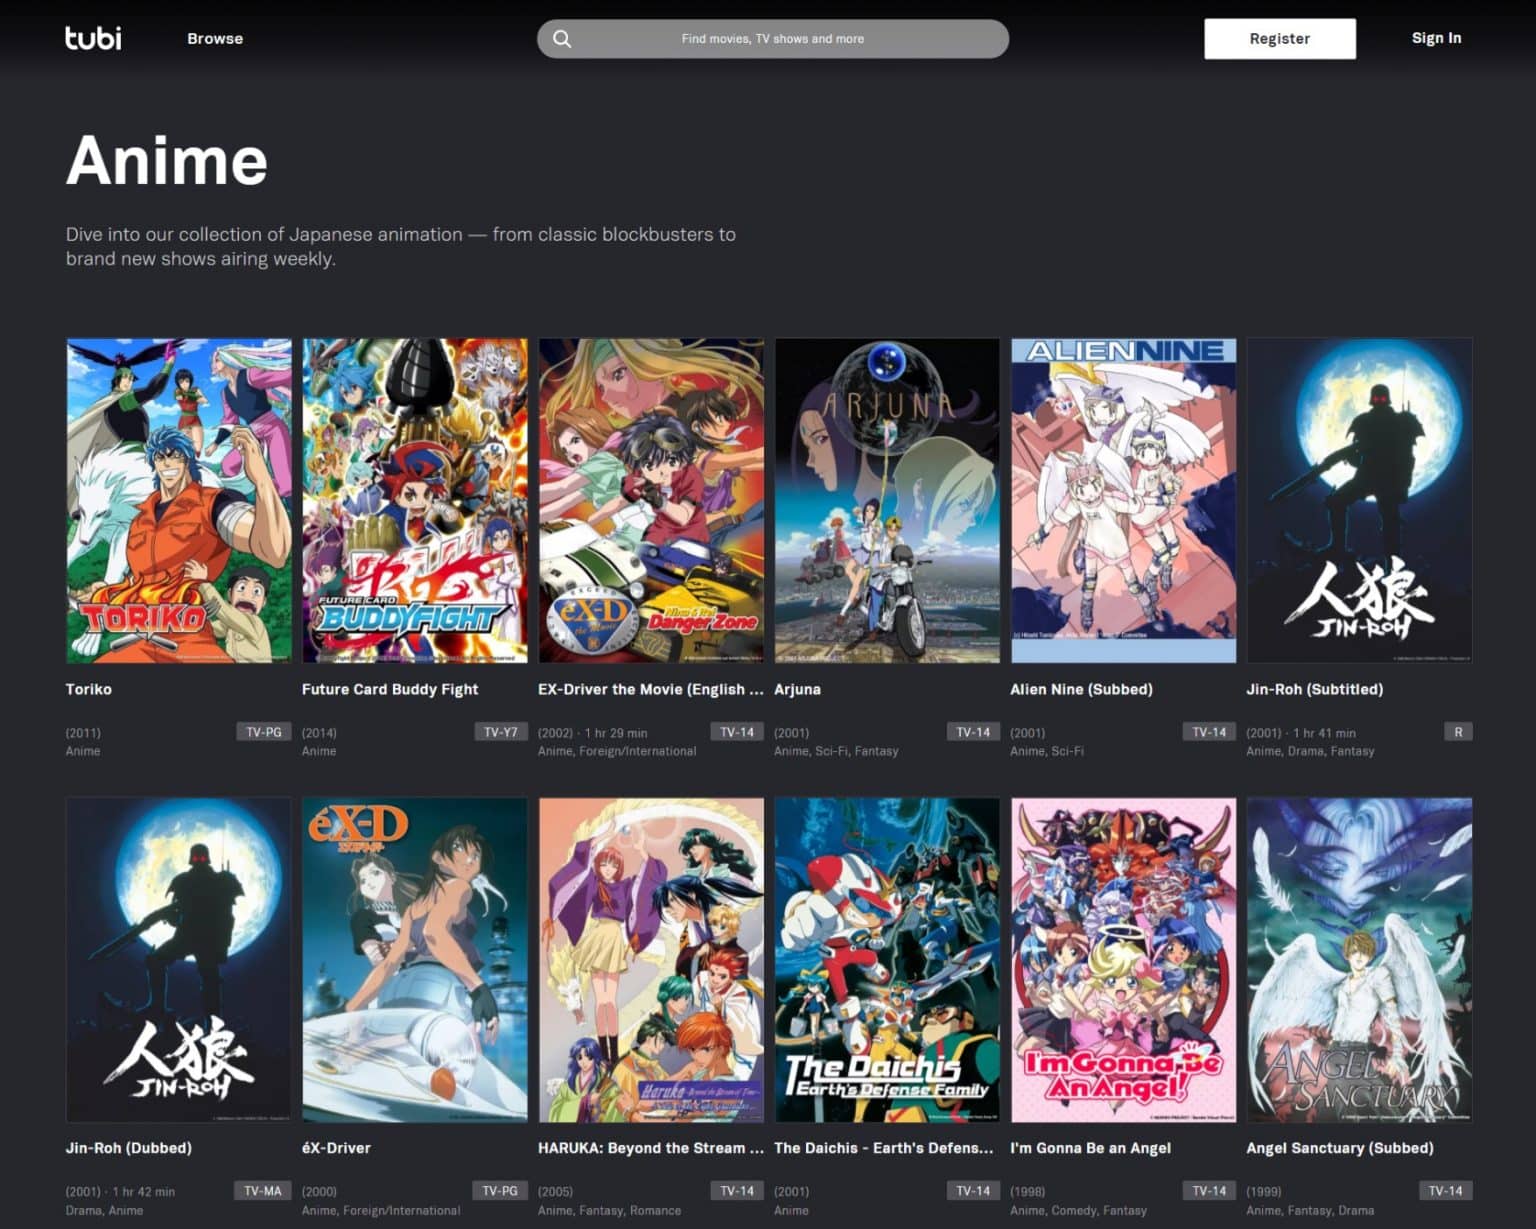 9 Free Anime Streaming Sites to Watch Anime Online Legally - Tech Baked